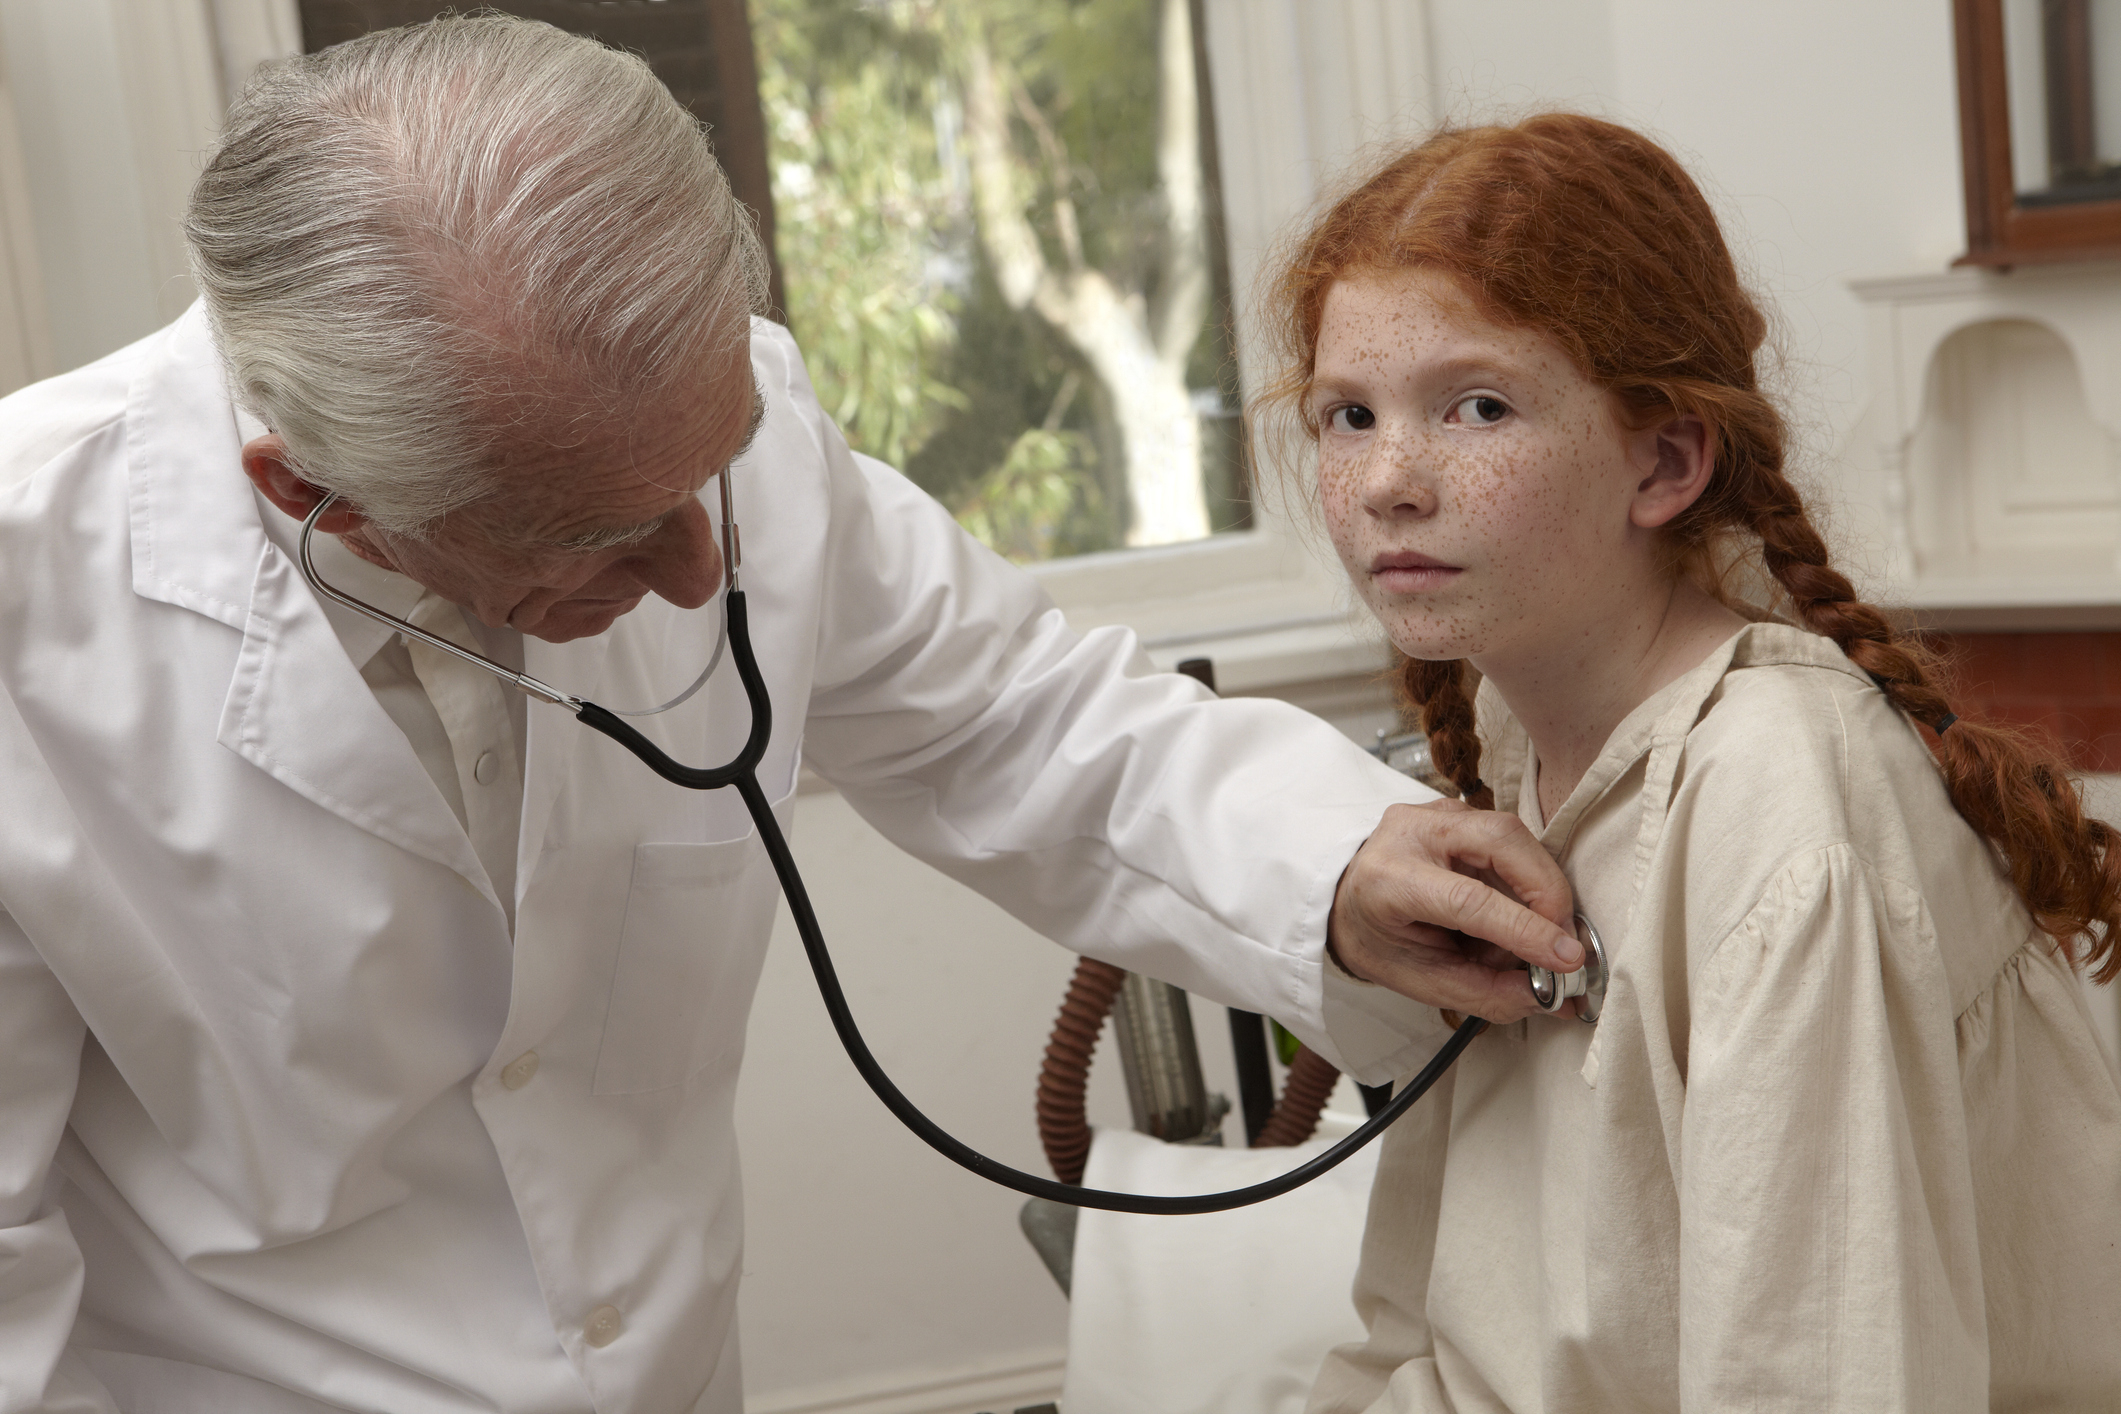 A doctor in a white coat uses a stethoscope to examine a girl with red hair and braids wearing a light shirt